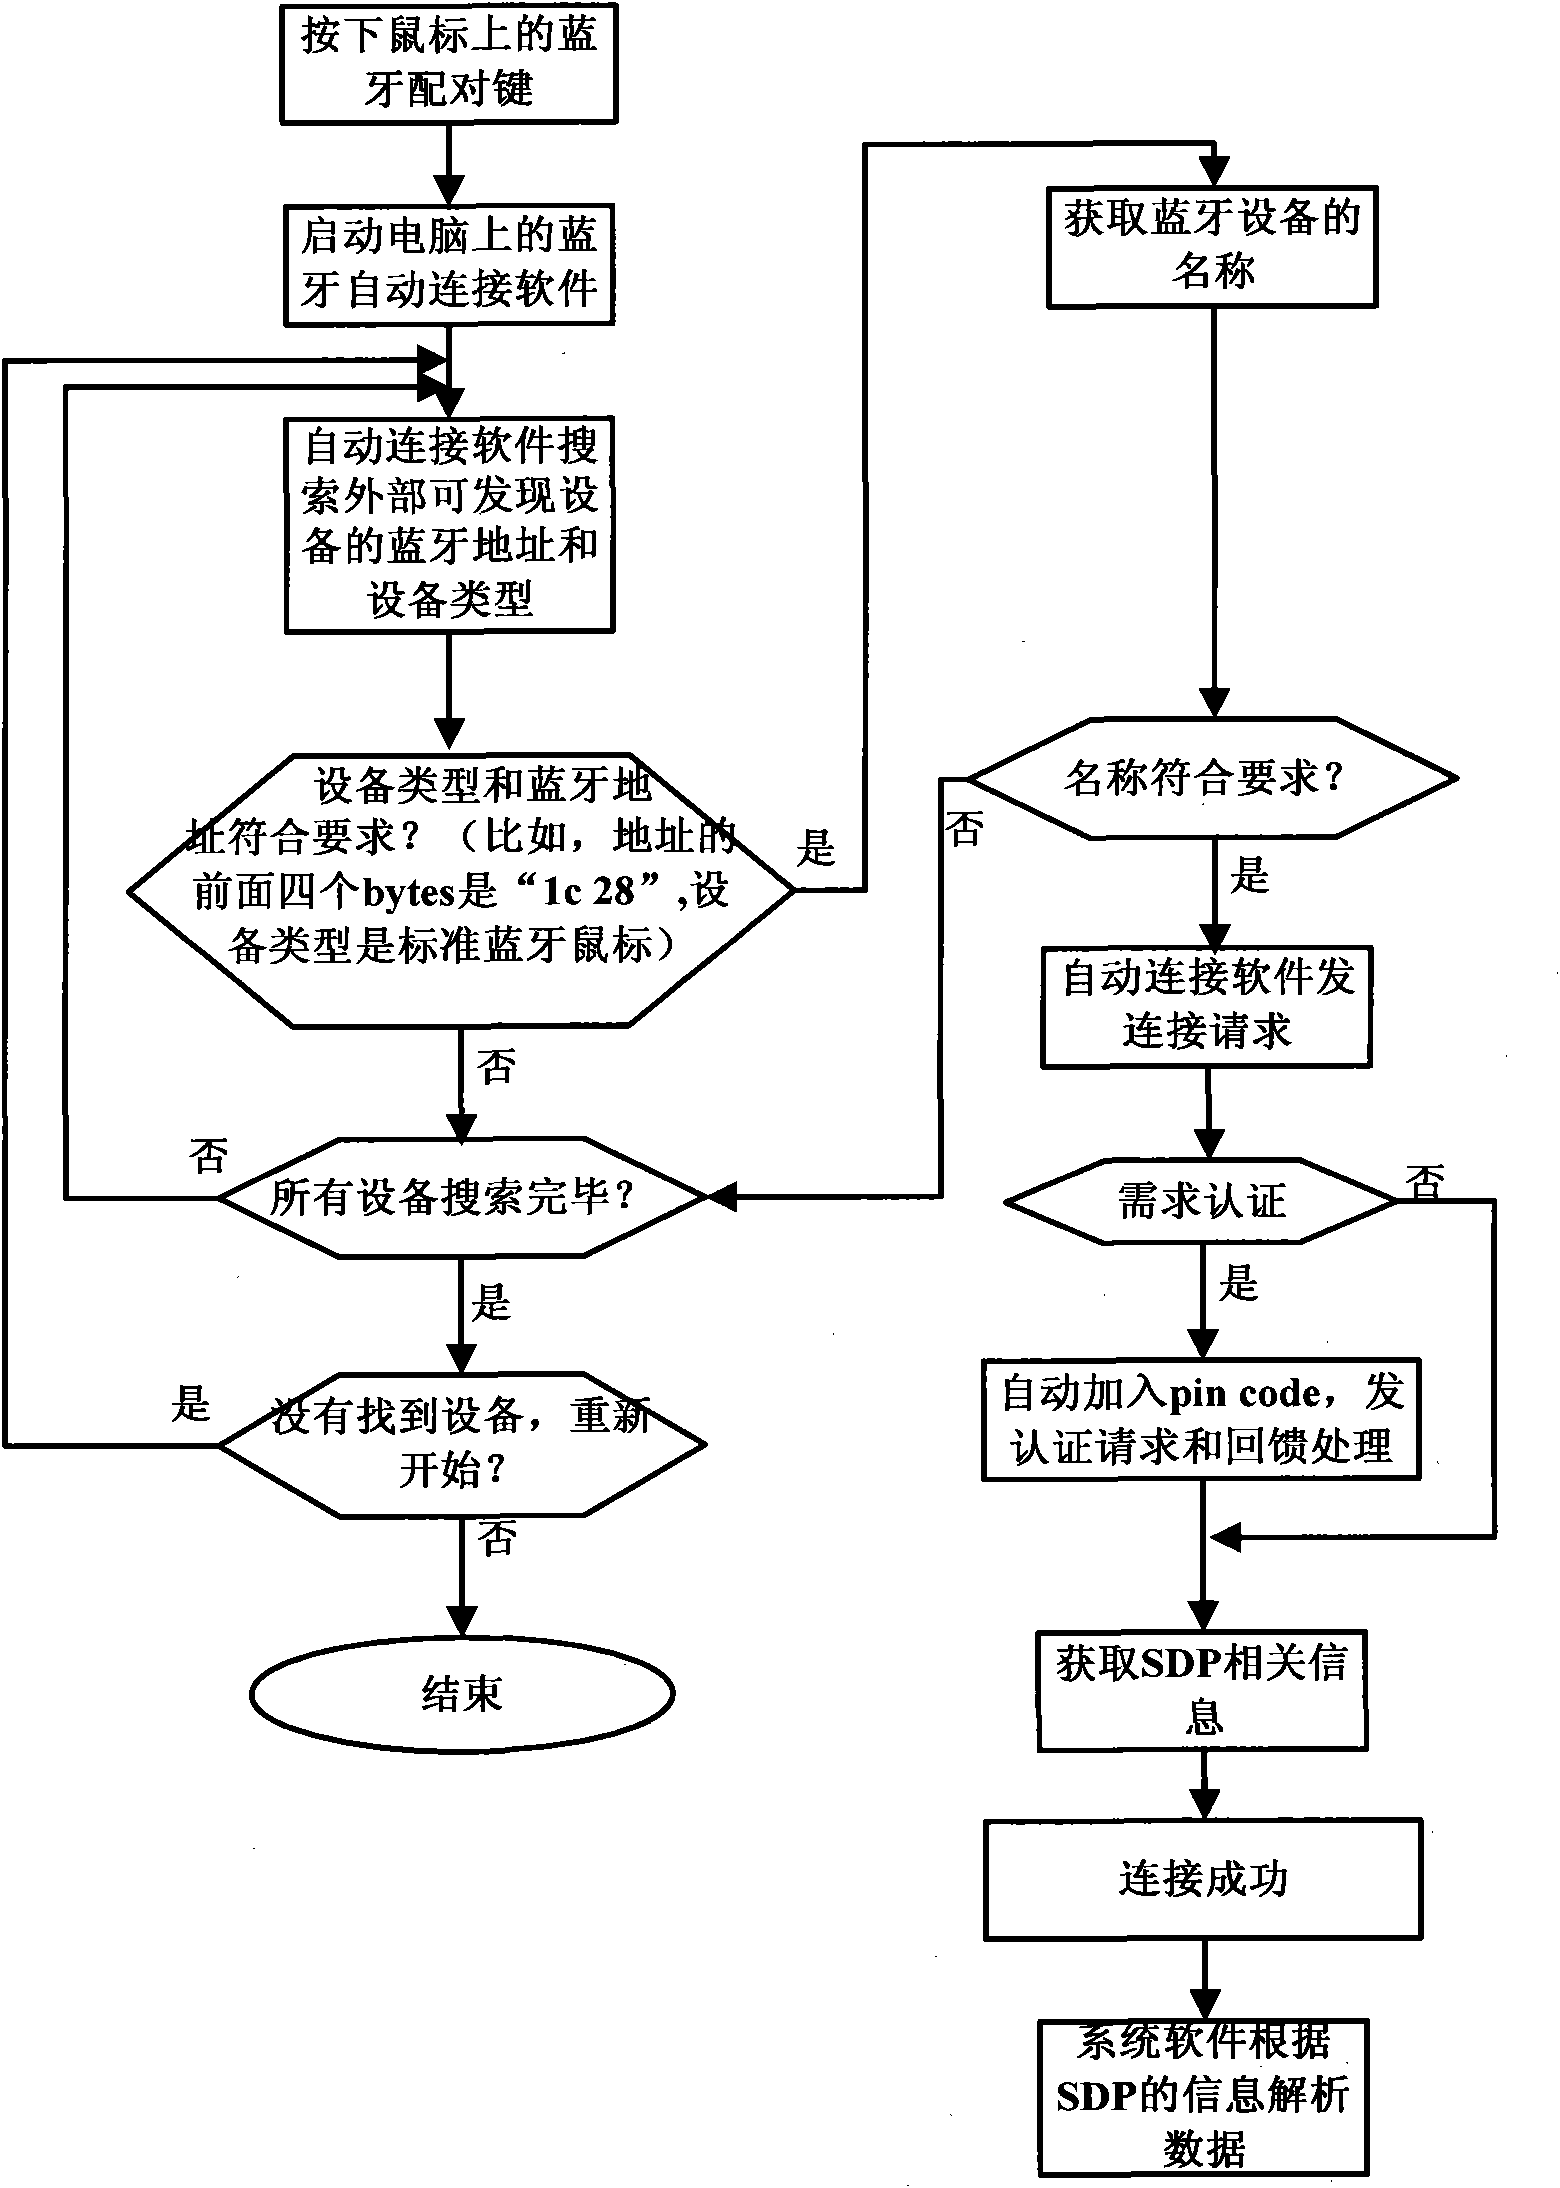 Connection method of Bluetooth device